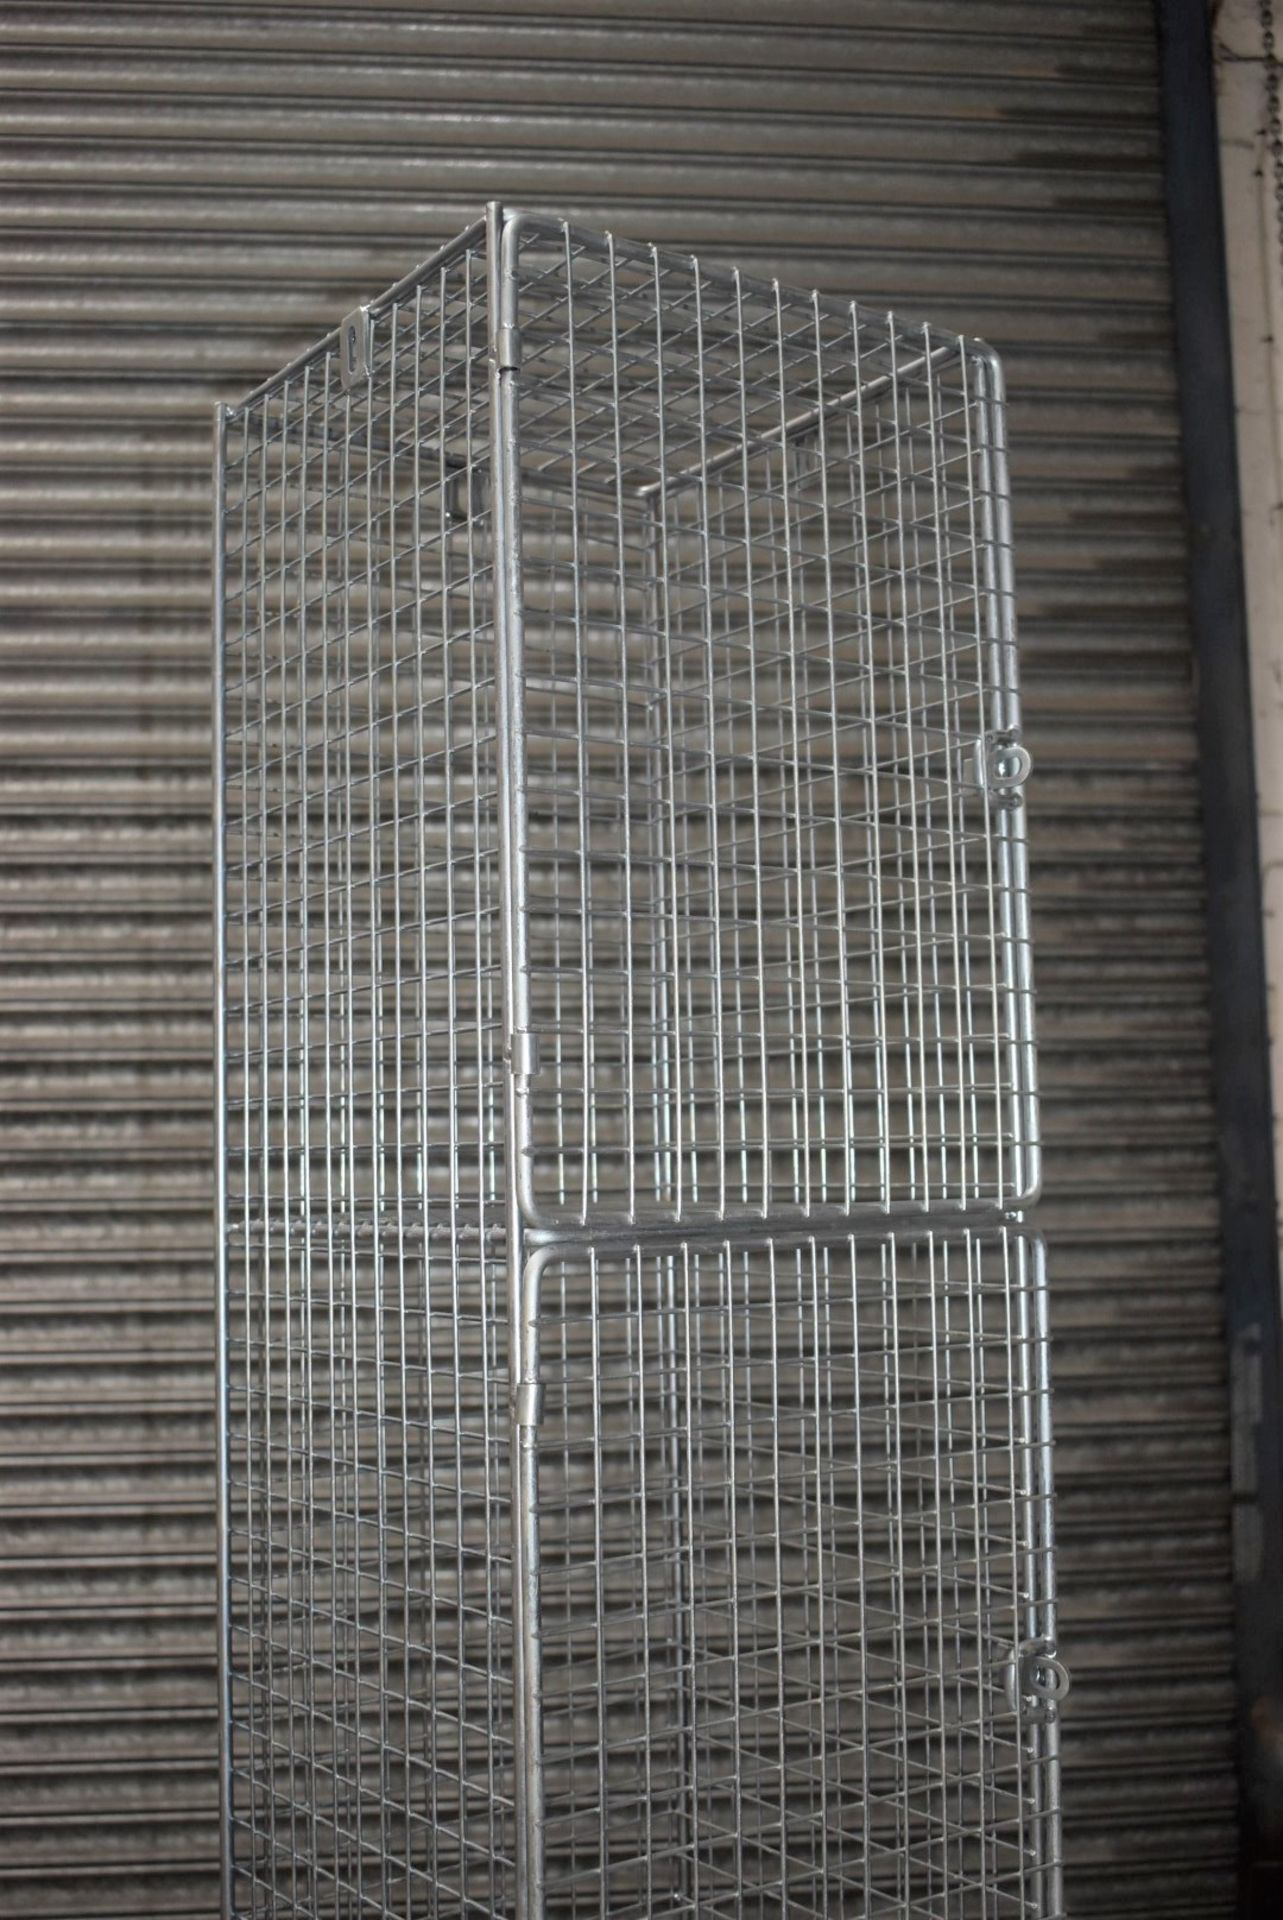 1 x Wire Mesh Cage Lockers With Four Locker Compartments - Dimensions: H193 x W30 x D32 cms - Ref: - Image 5 of 11